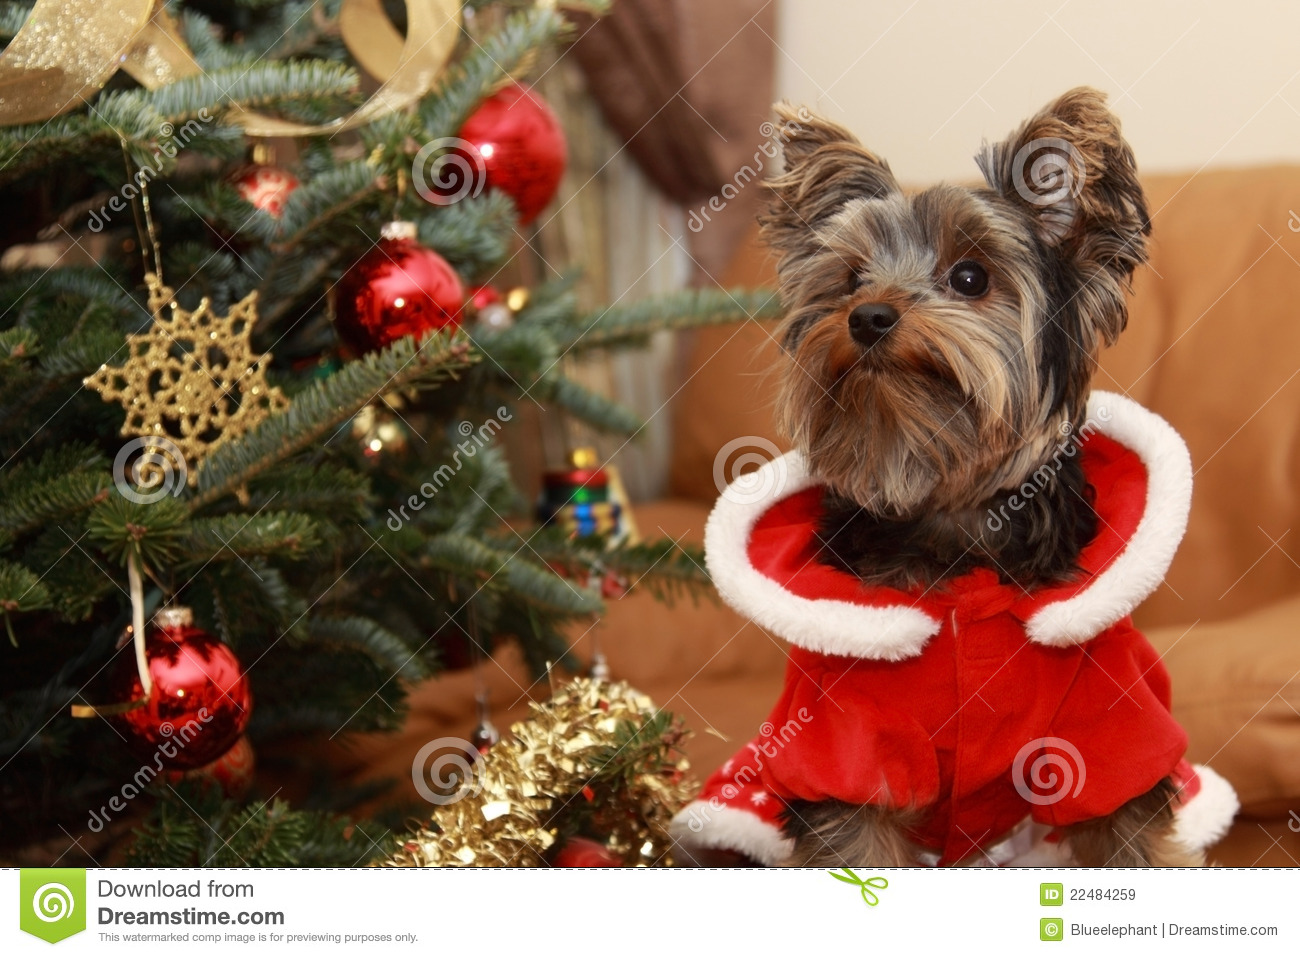 Christmas Tree And Yorkie Puppy Royalty Free Stock Images   Image    